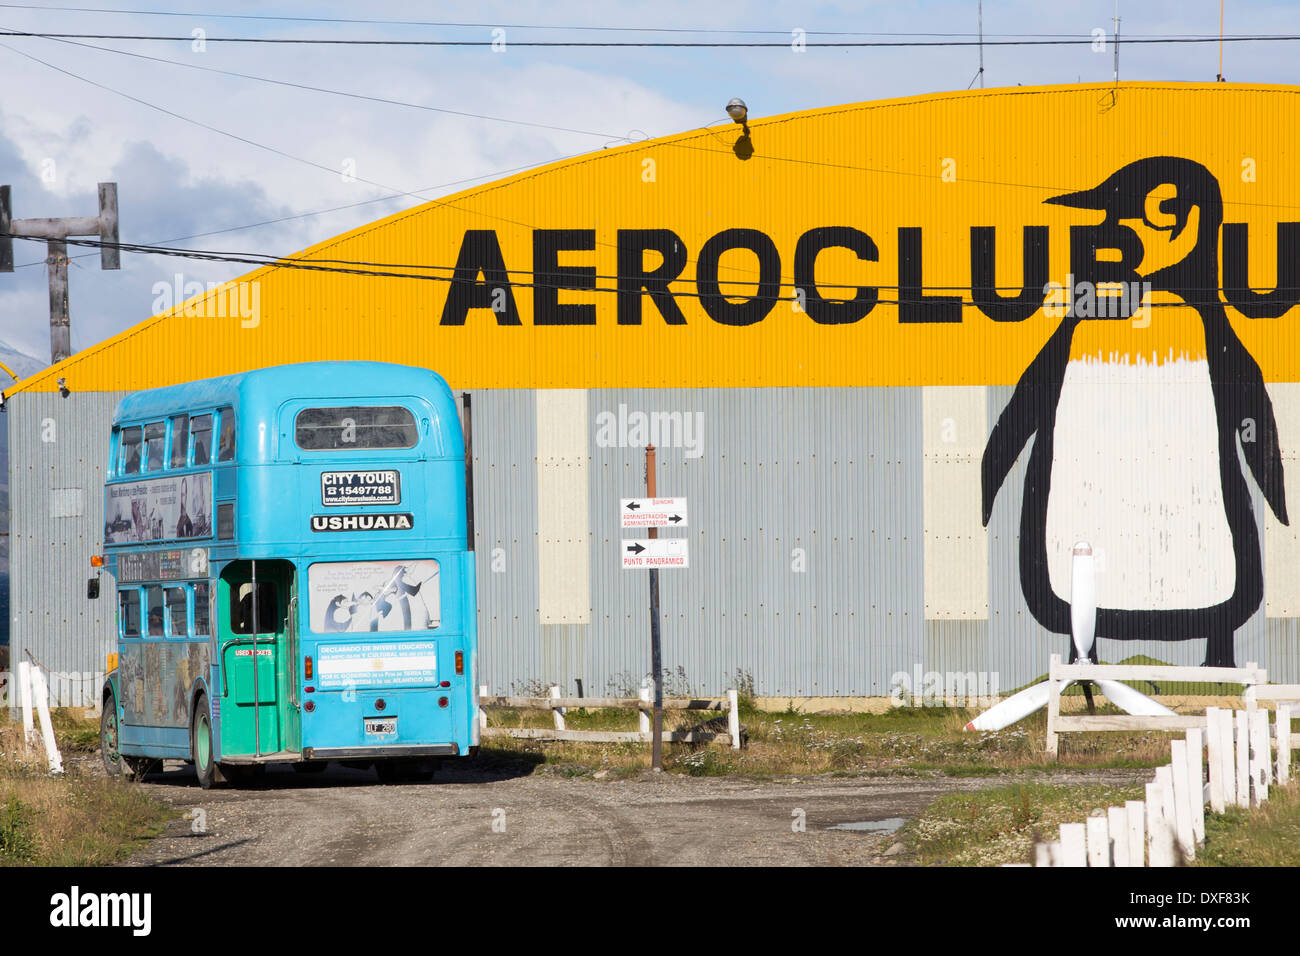 The aeroclub Ushuaia in the town of Ushuaia which is the capital of Tierra del Fuego, in Argentina, Stock Photo